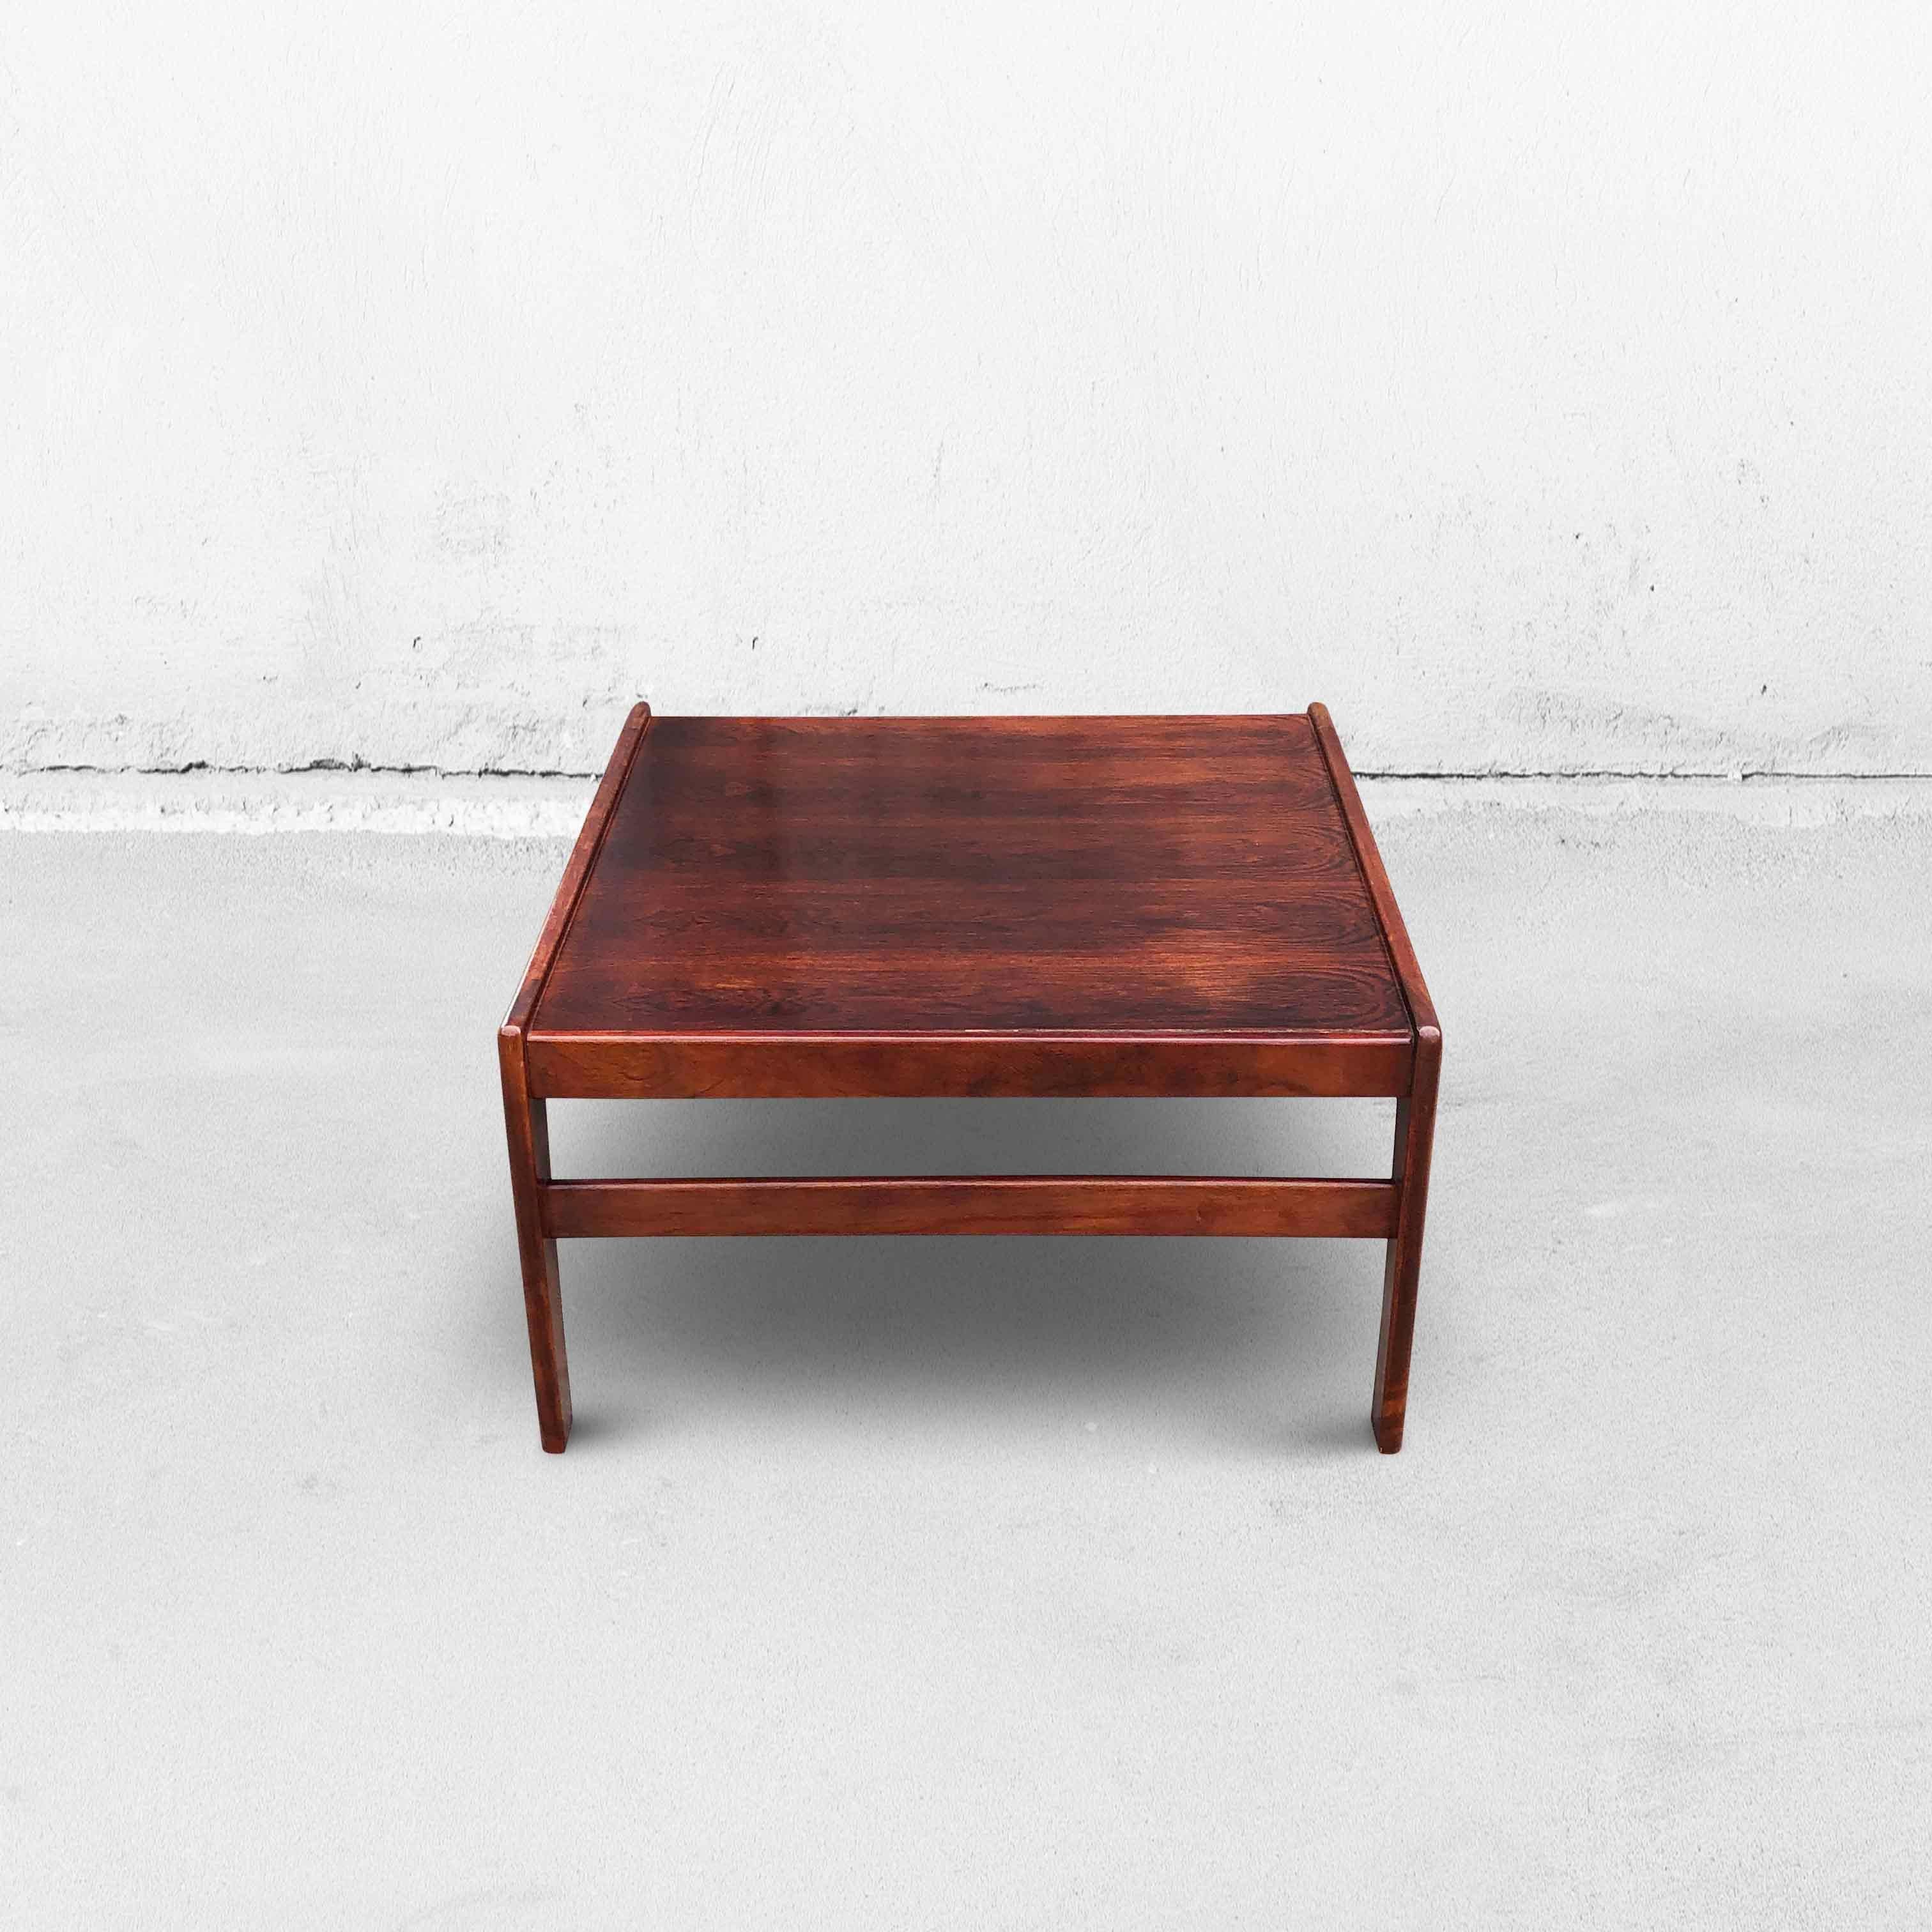 this table is made of rosewood